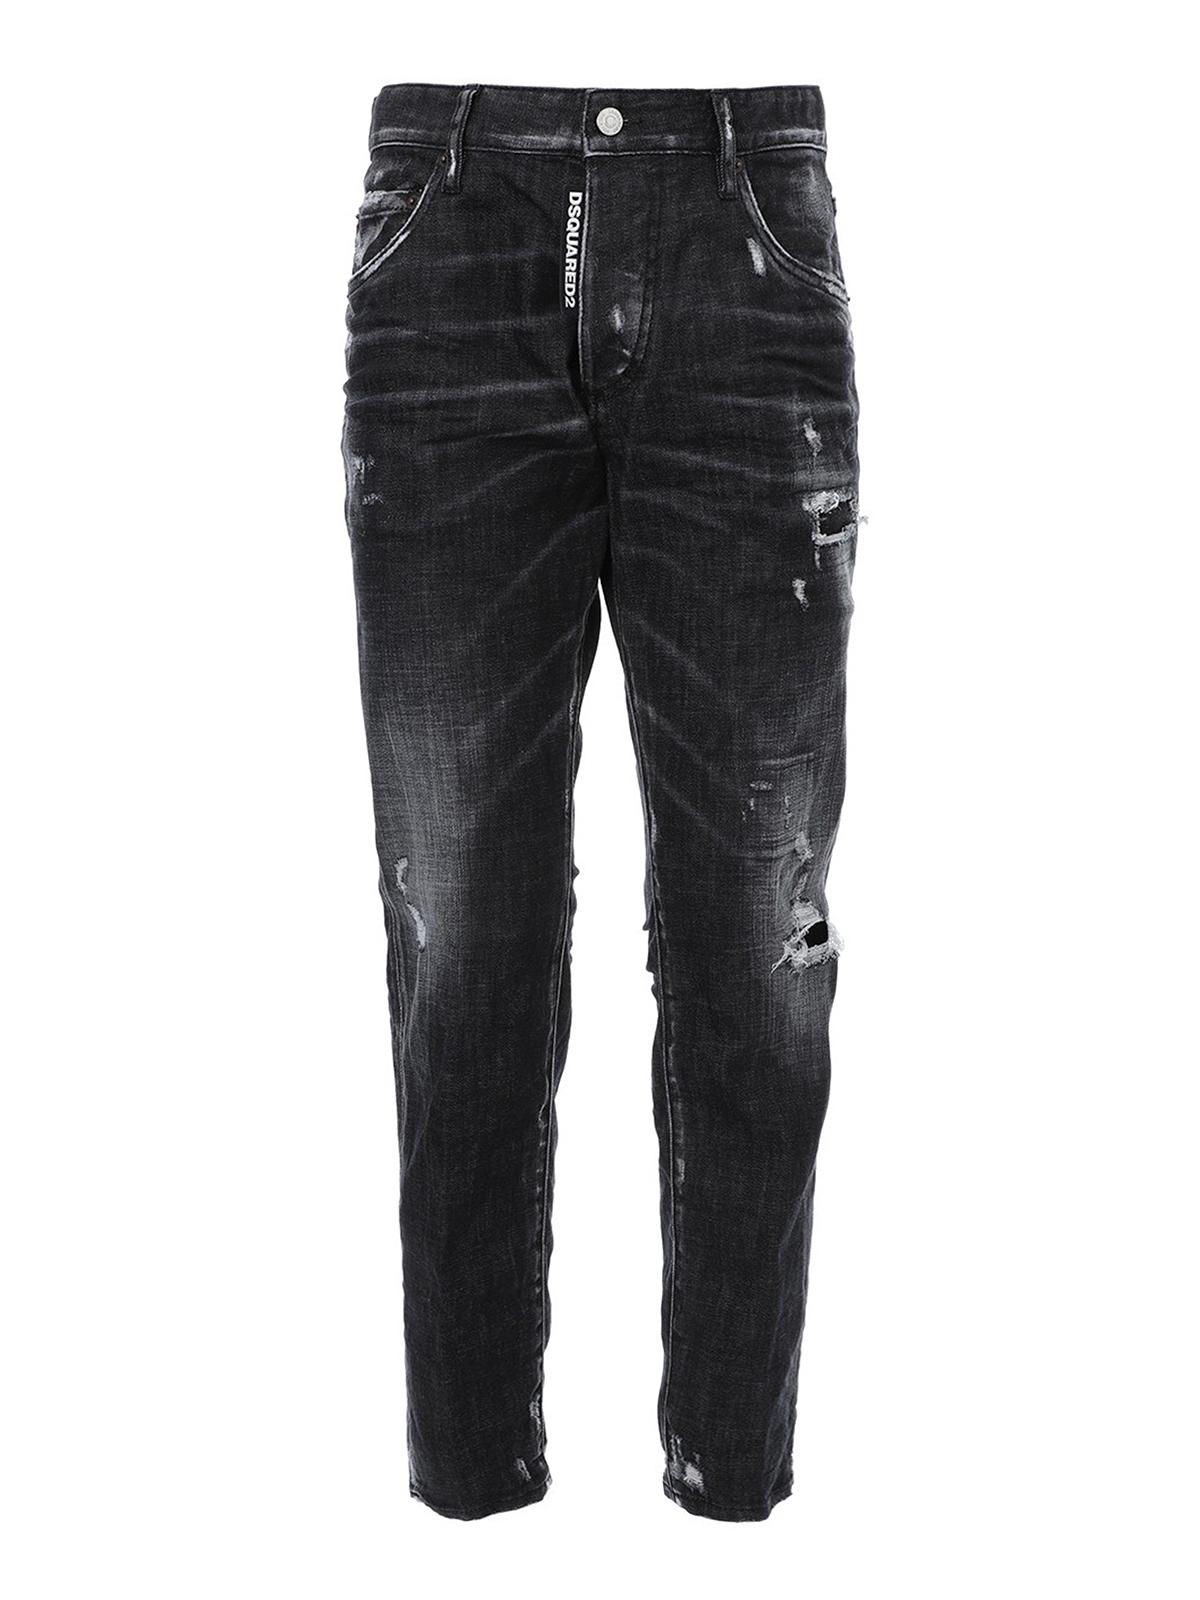 DSquared² Denim Ripped Faded Jeans in Black - Lyst